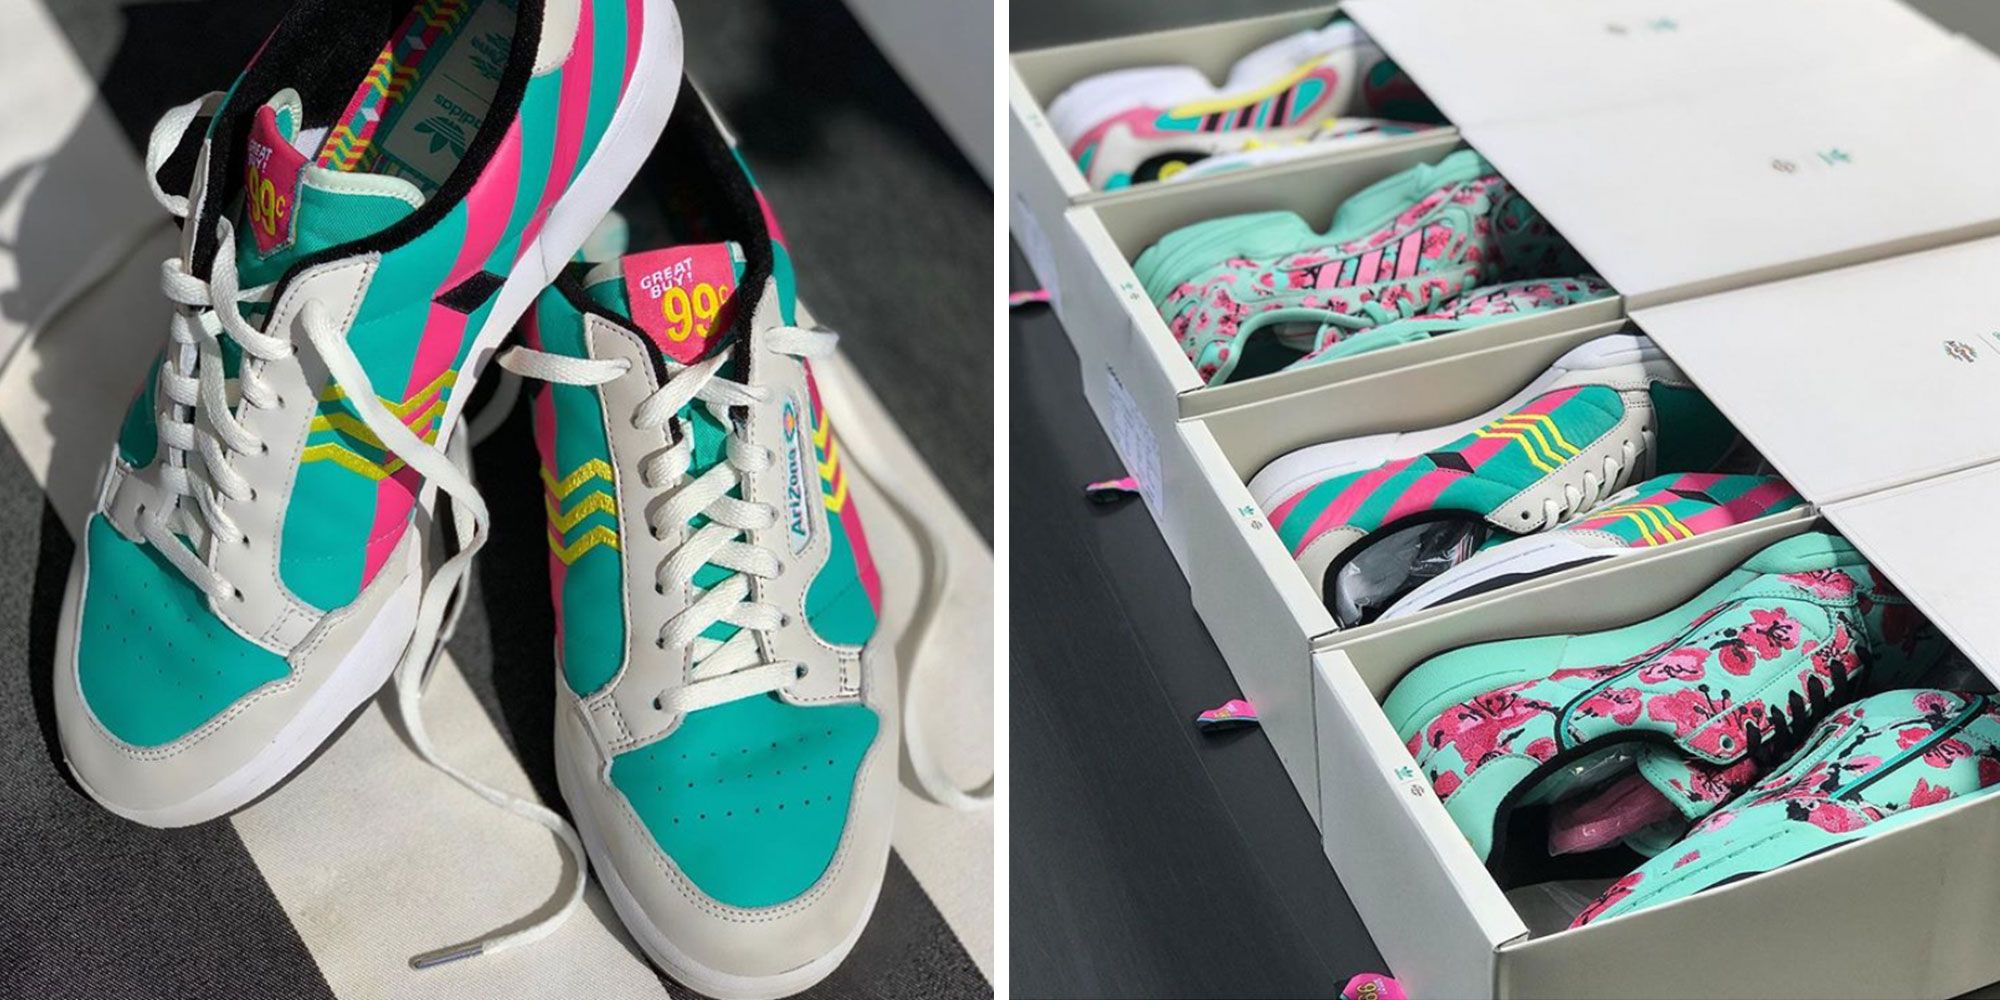 methodologie Kracht begroting Arizona Iced Tea x Adidas Made 99-Cent Sneakers, But Police Shut Down The  Pop-Up